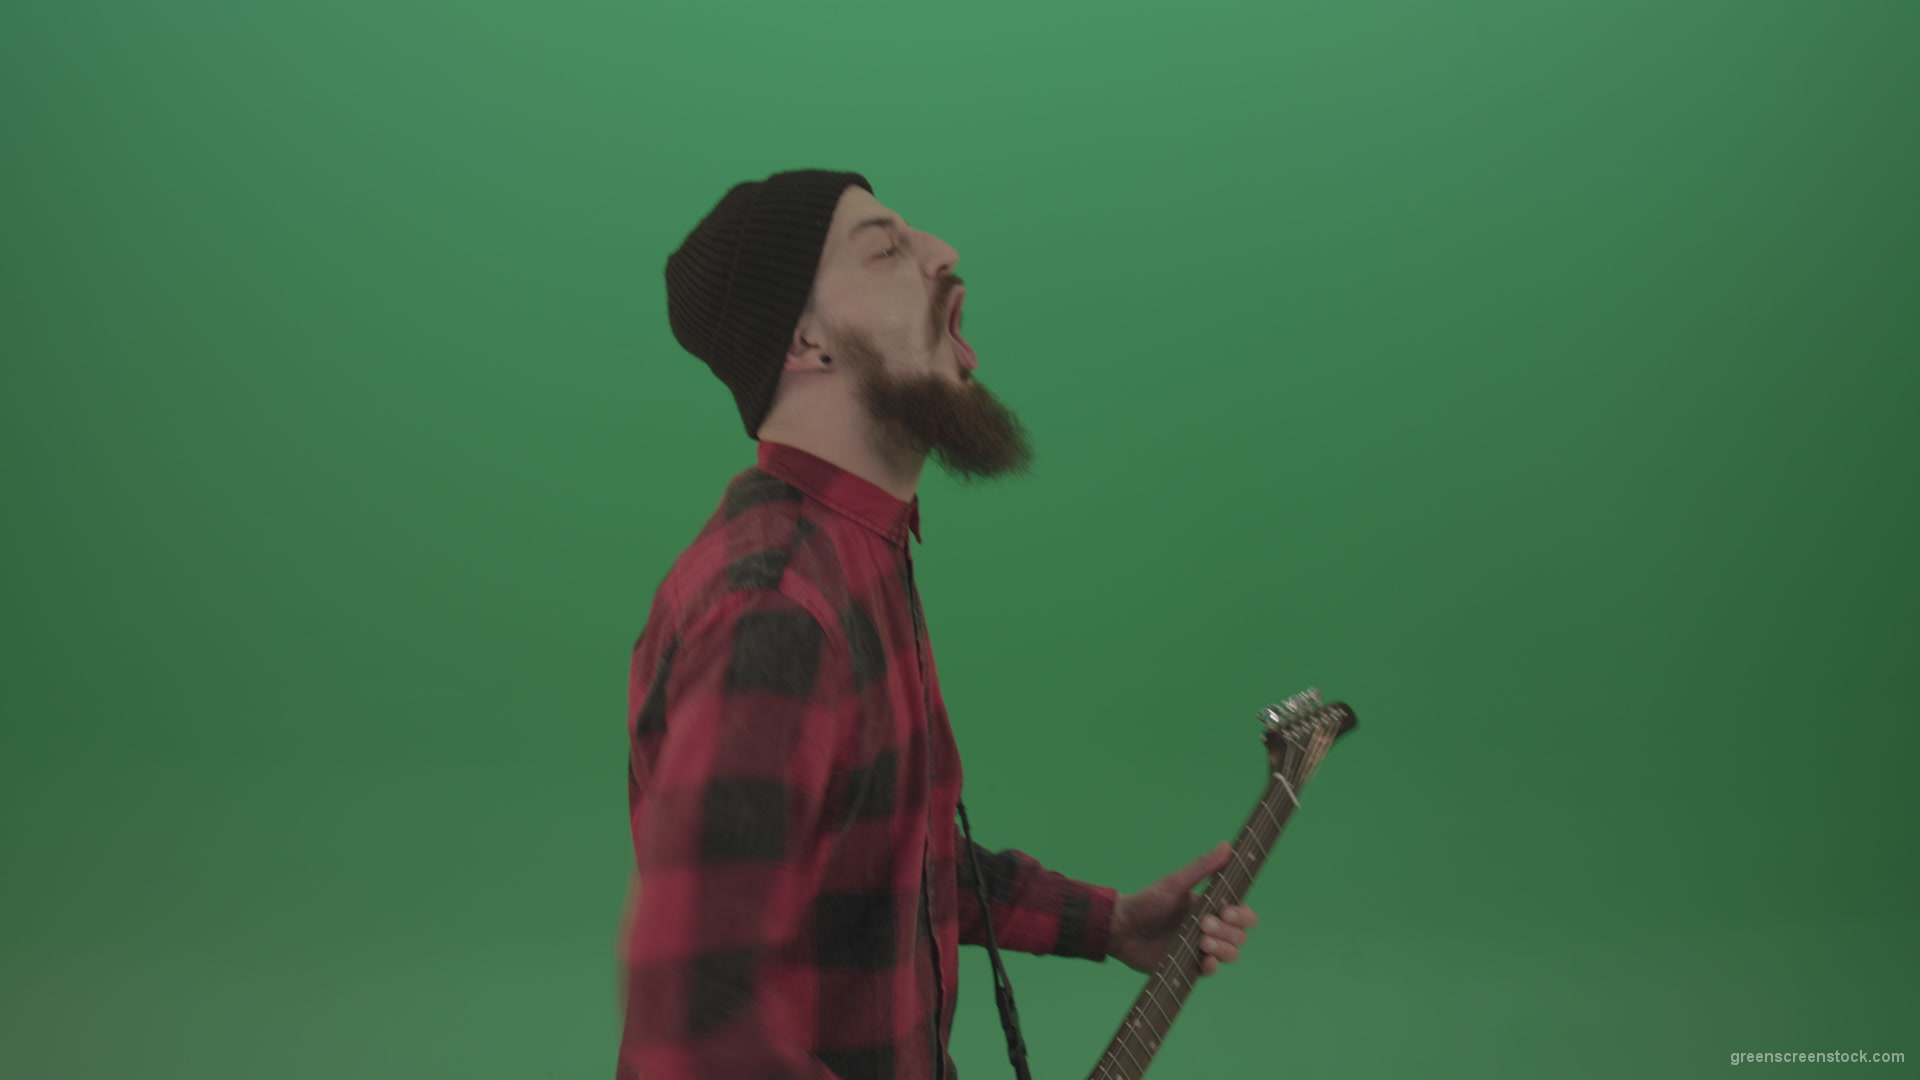 Angry-punk-rock-man-guitarist-play-guitar-and-scream-death-hardcore-music-isolated-on-green-screen_009 Green Screen Stock